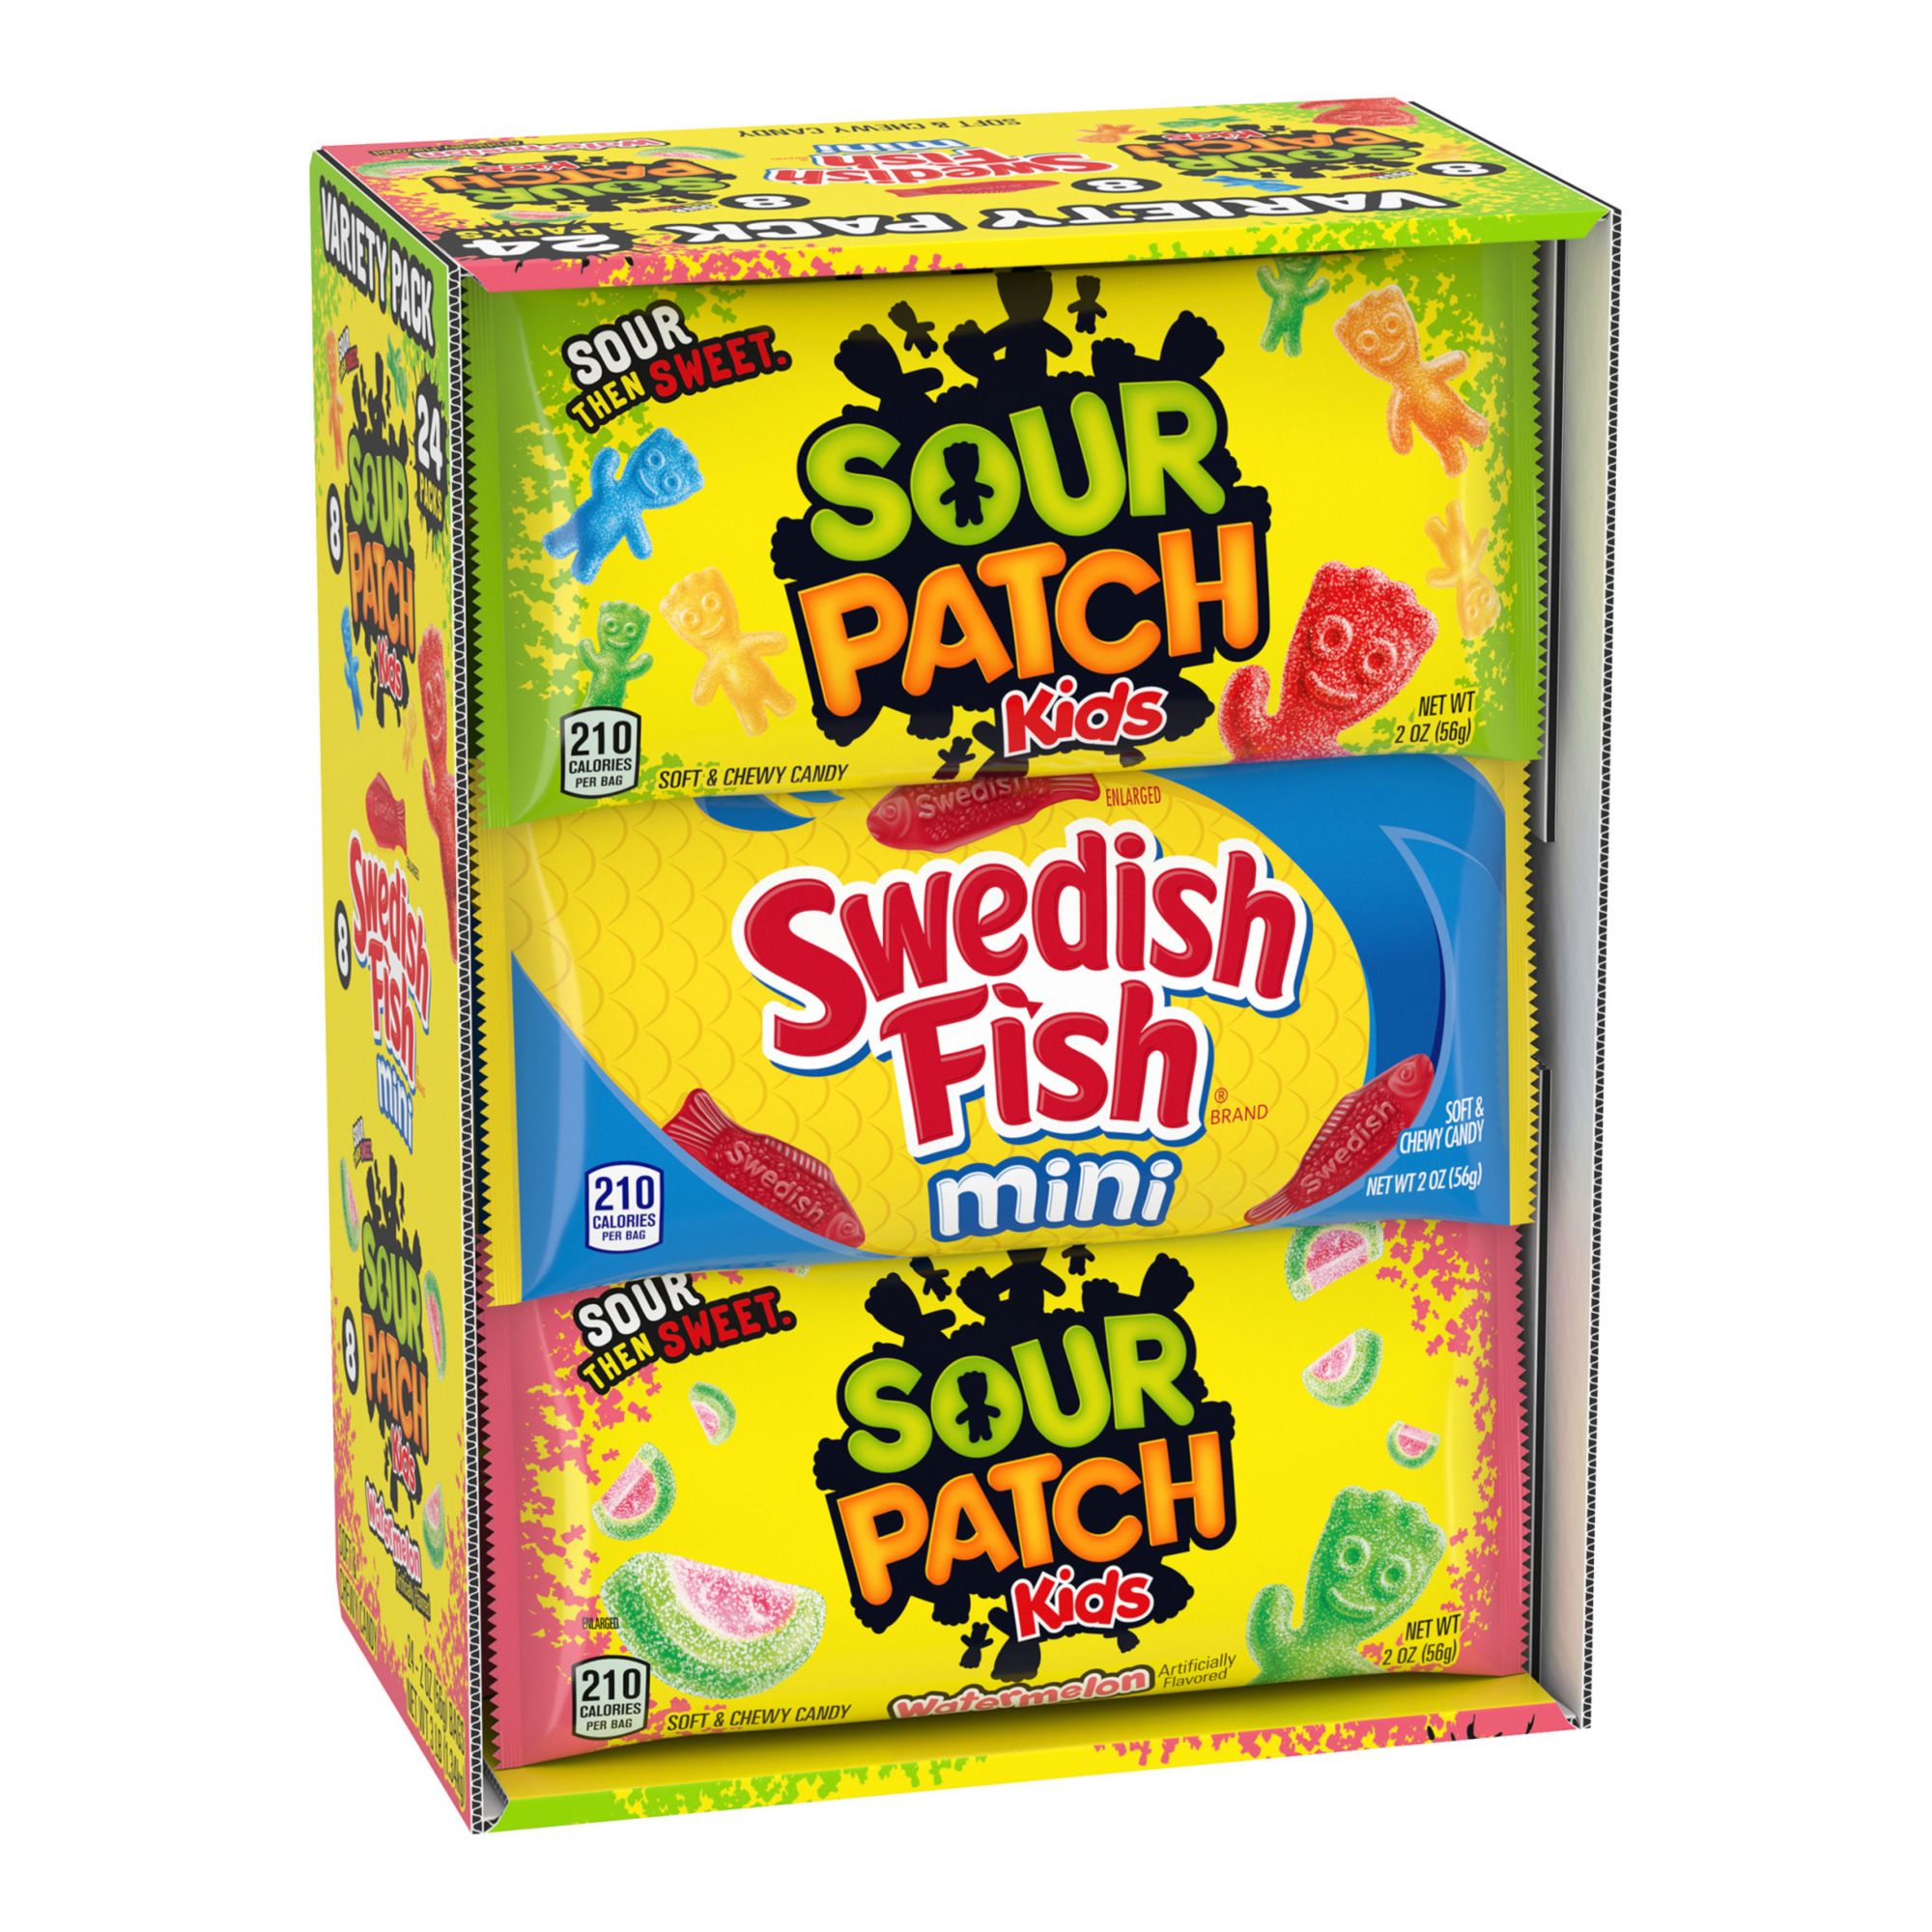 Sour Patch Kids and Swedish Fish Mini Soft and Chewy Candy Variety Snack  Packs, 200 pk.